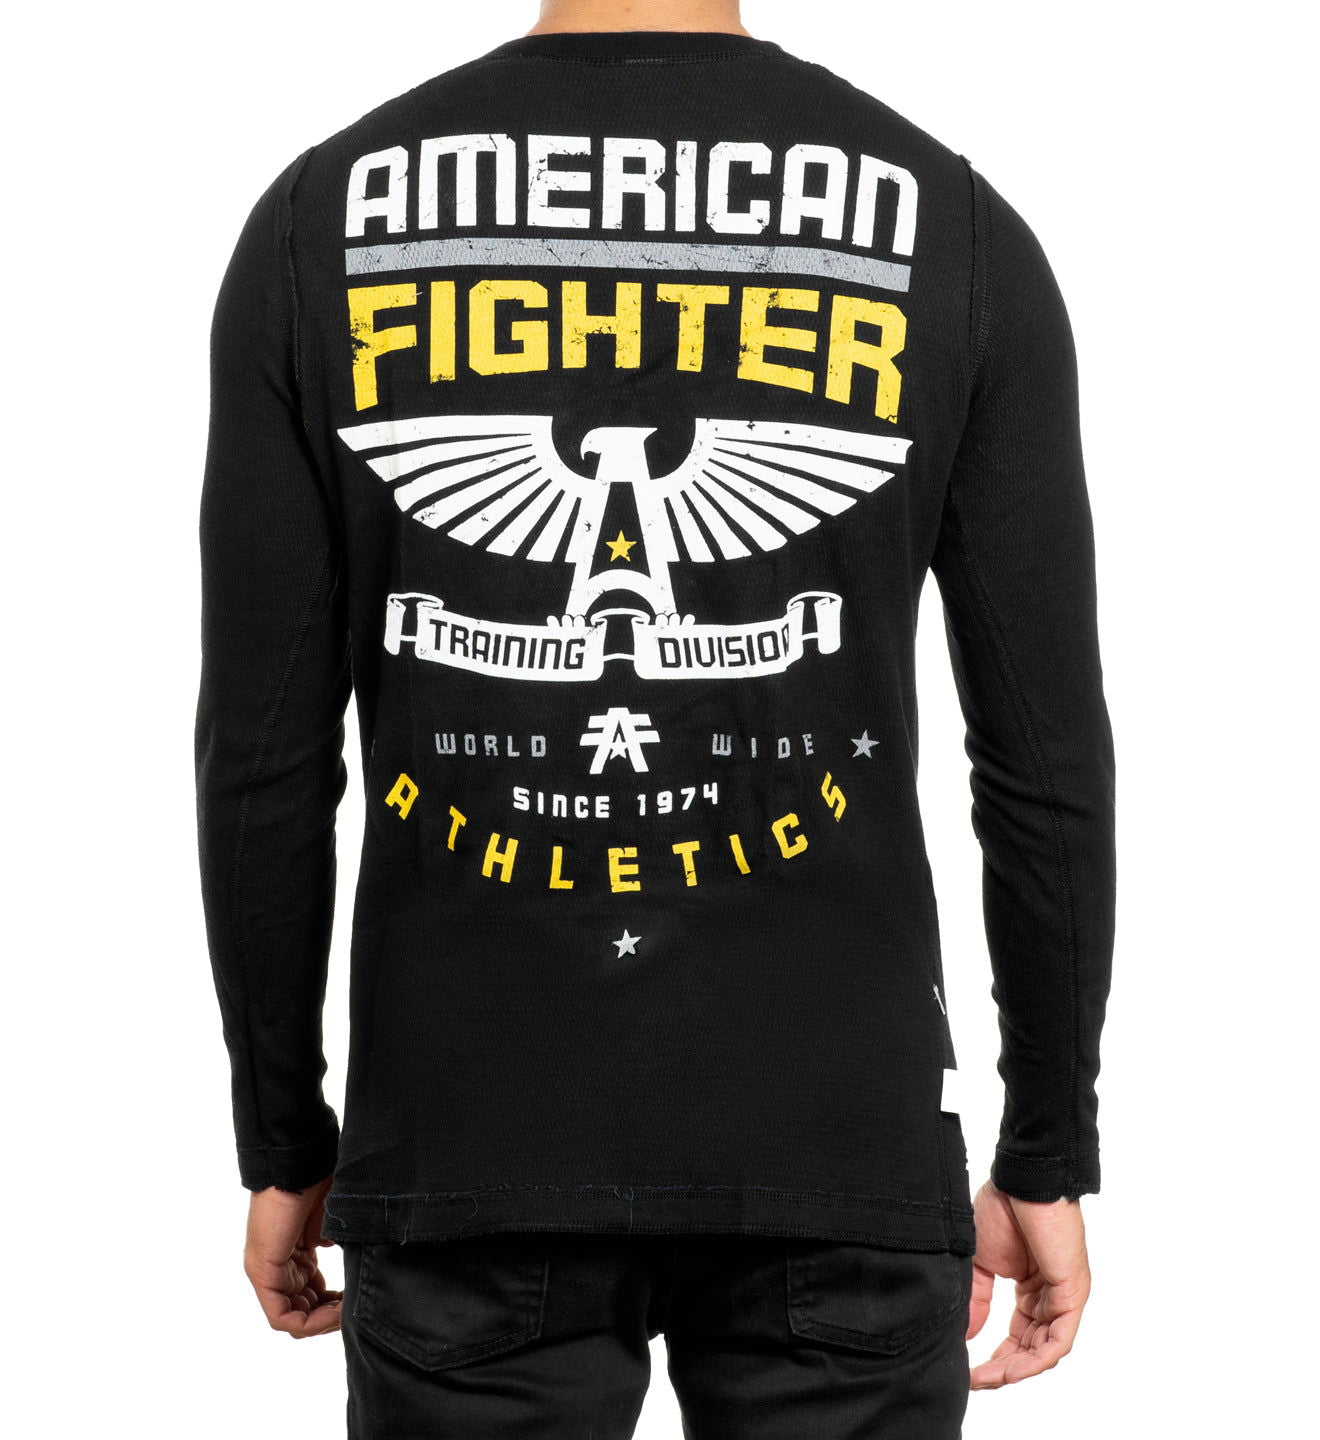 Athens - American Fighter